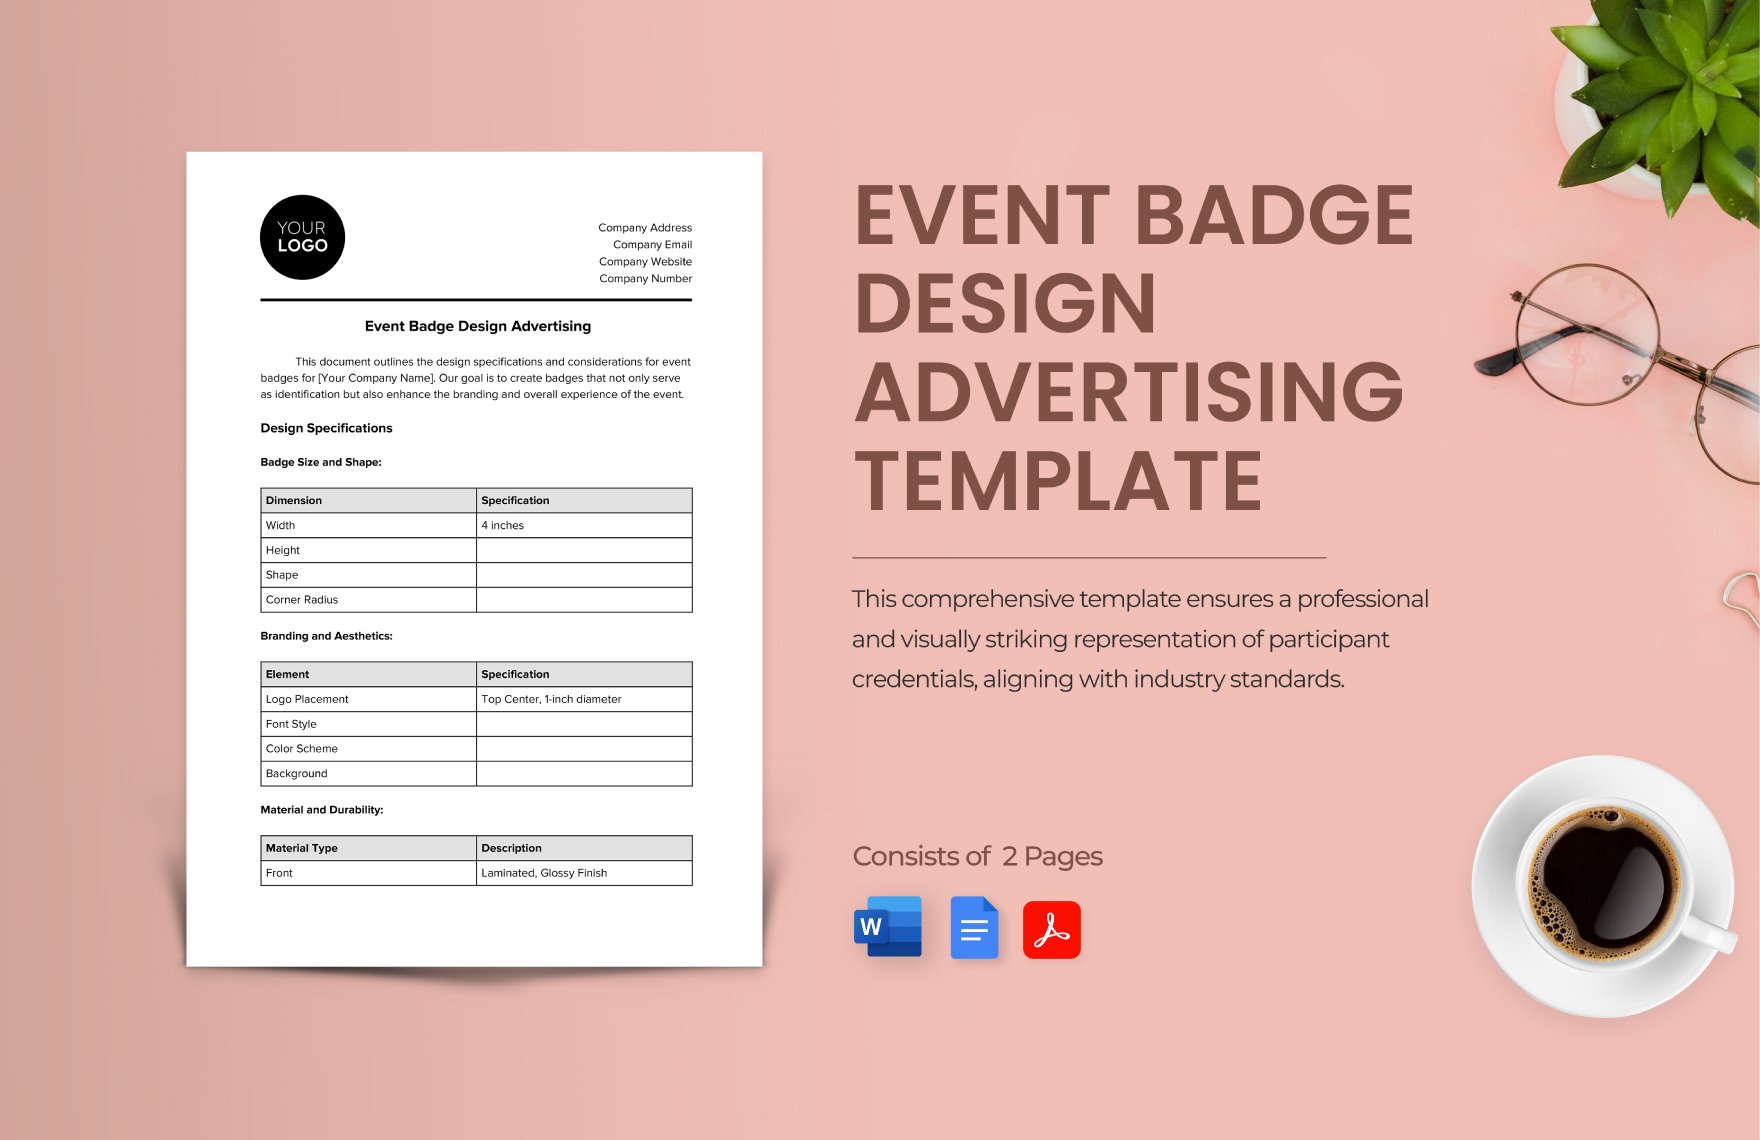 Free Event Badge Design Advertising Template in Word, Google Docs, PDF